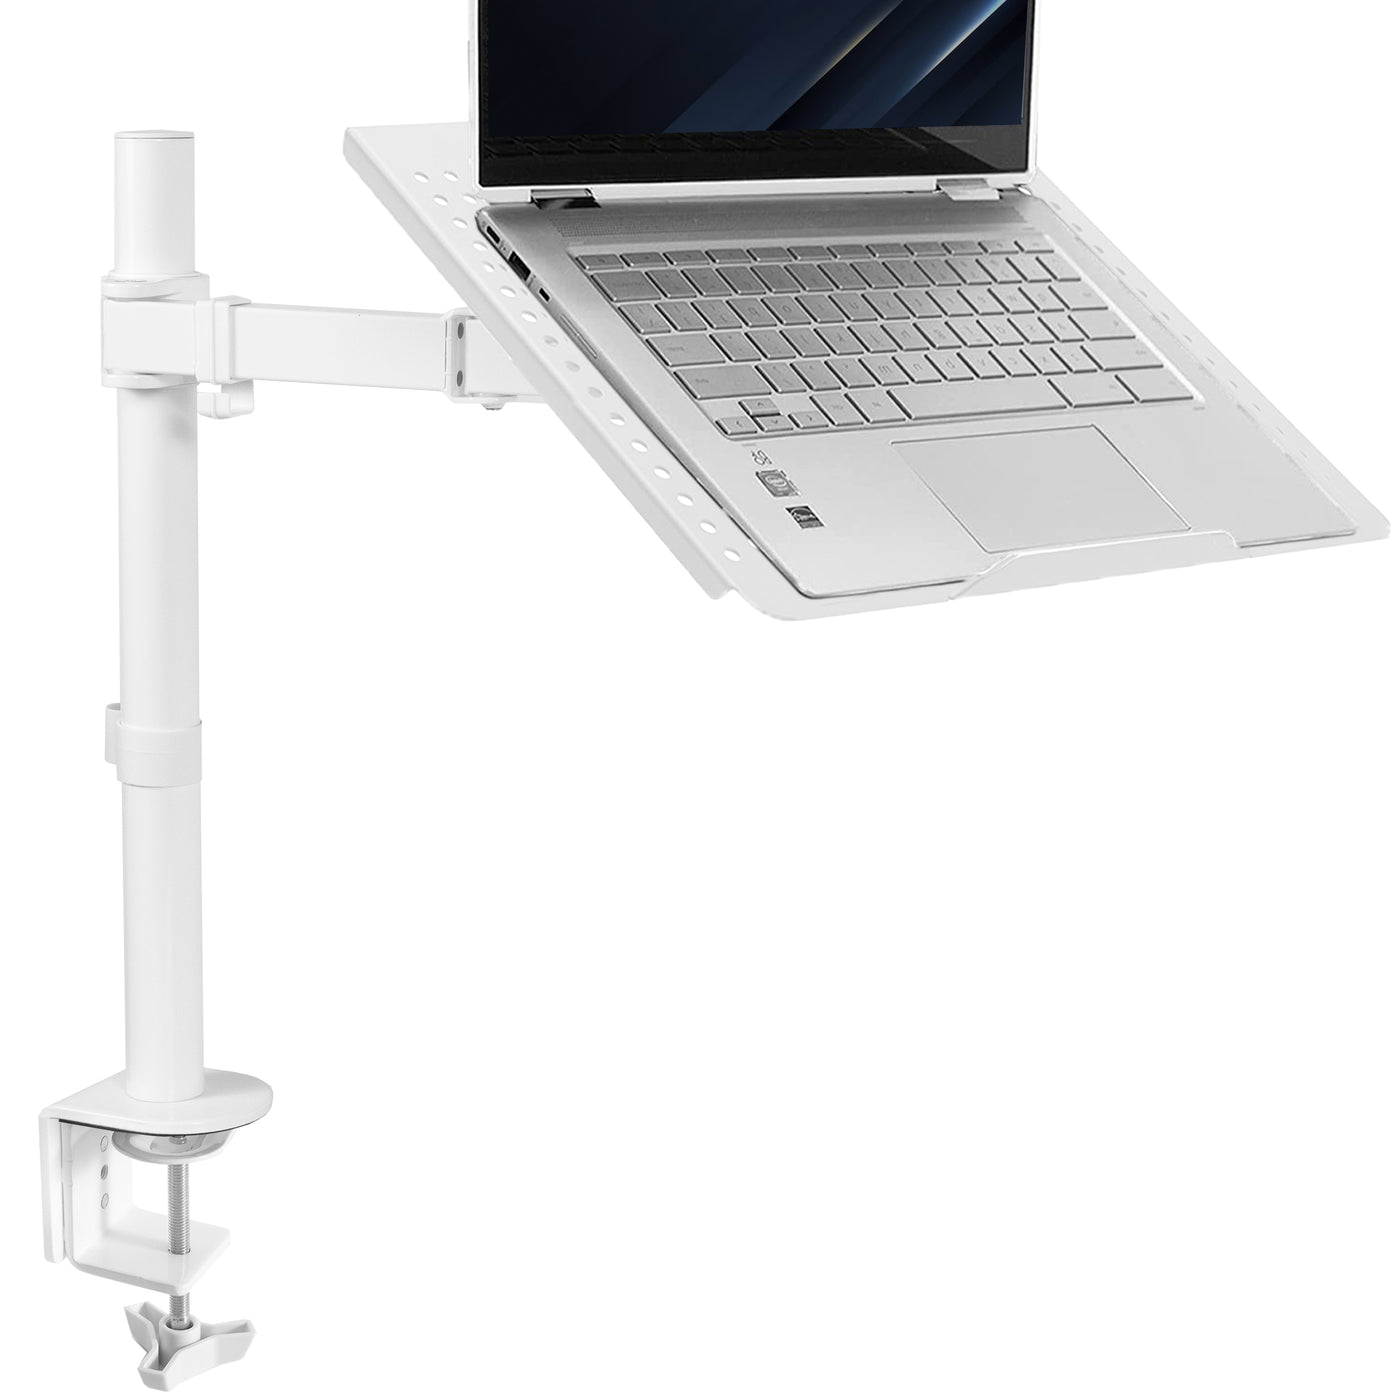 Tablet And Whiteboard Stand - 1 stand